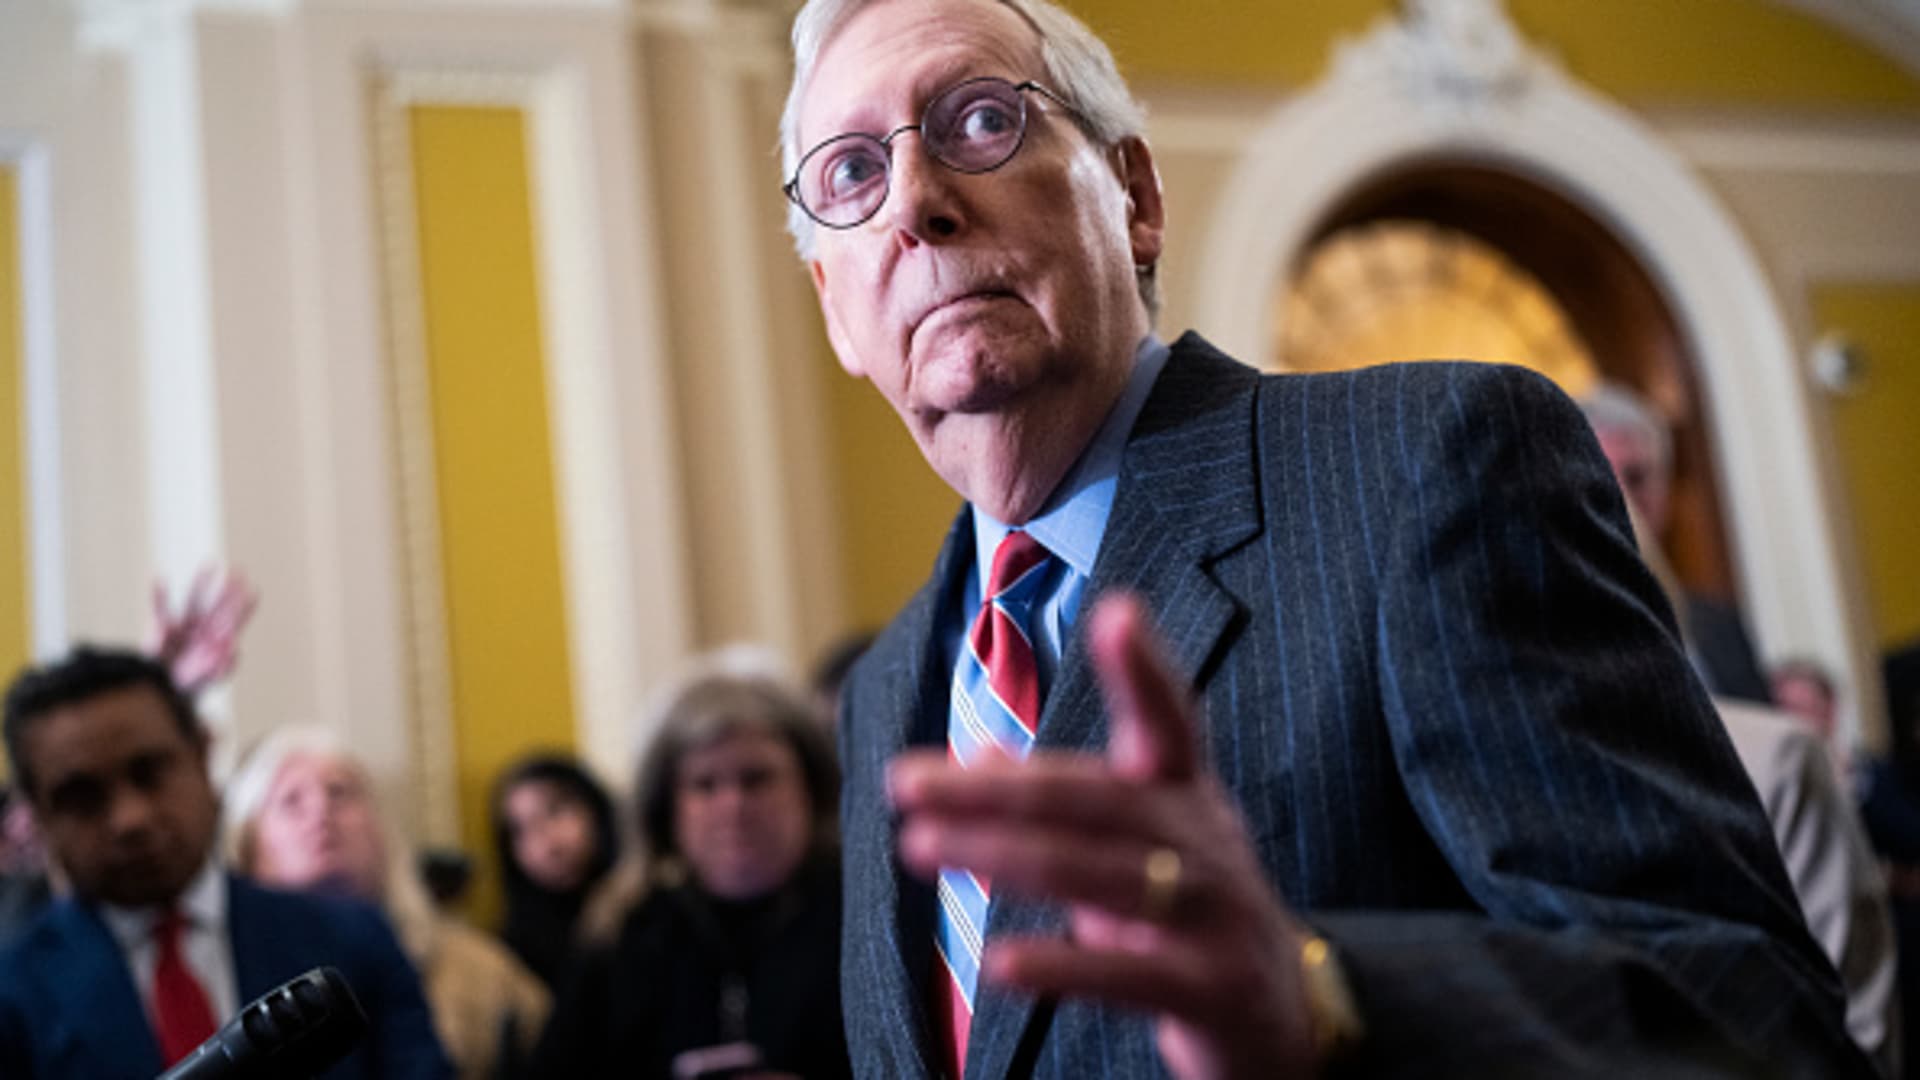 Mitch McConnell leaves rehab facility just after therapy for concussion